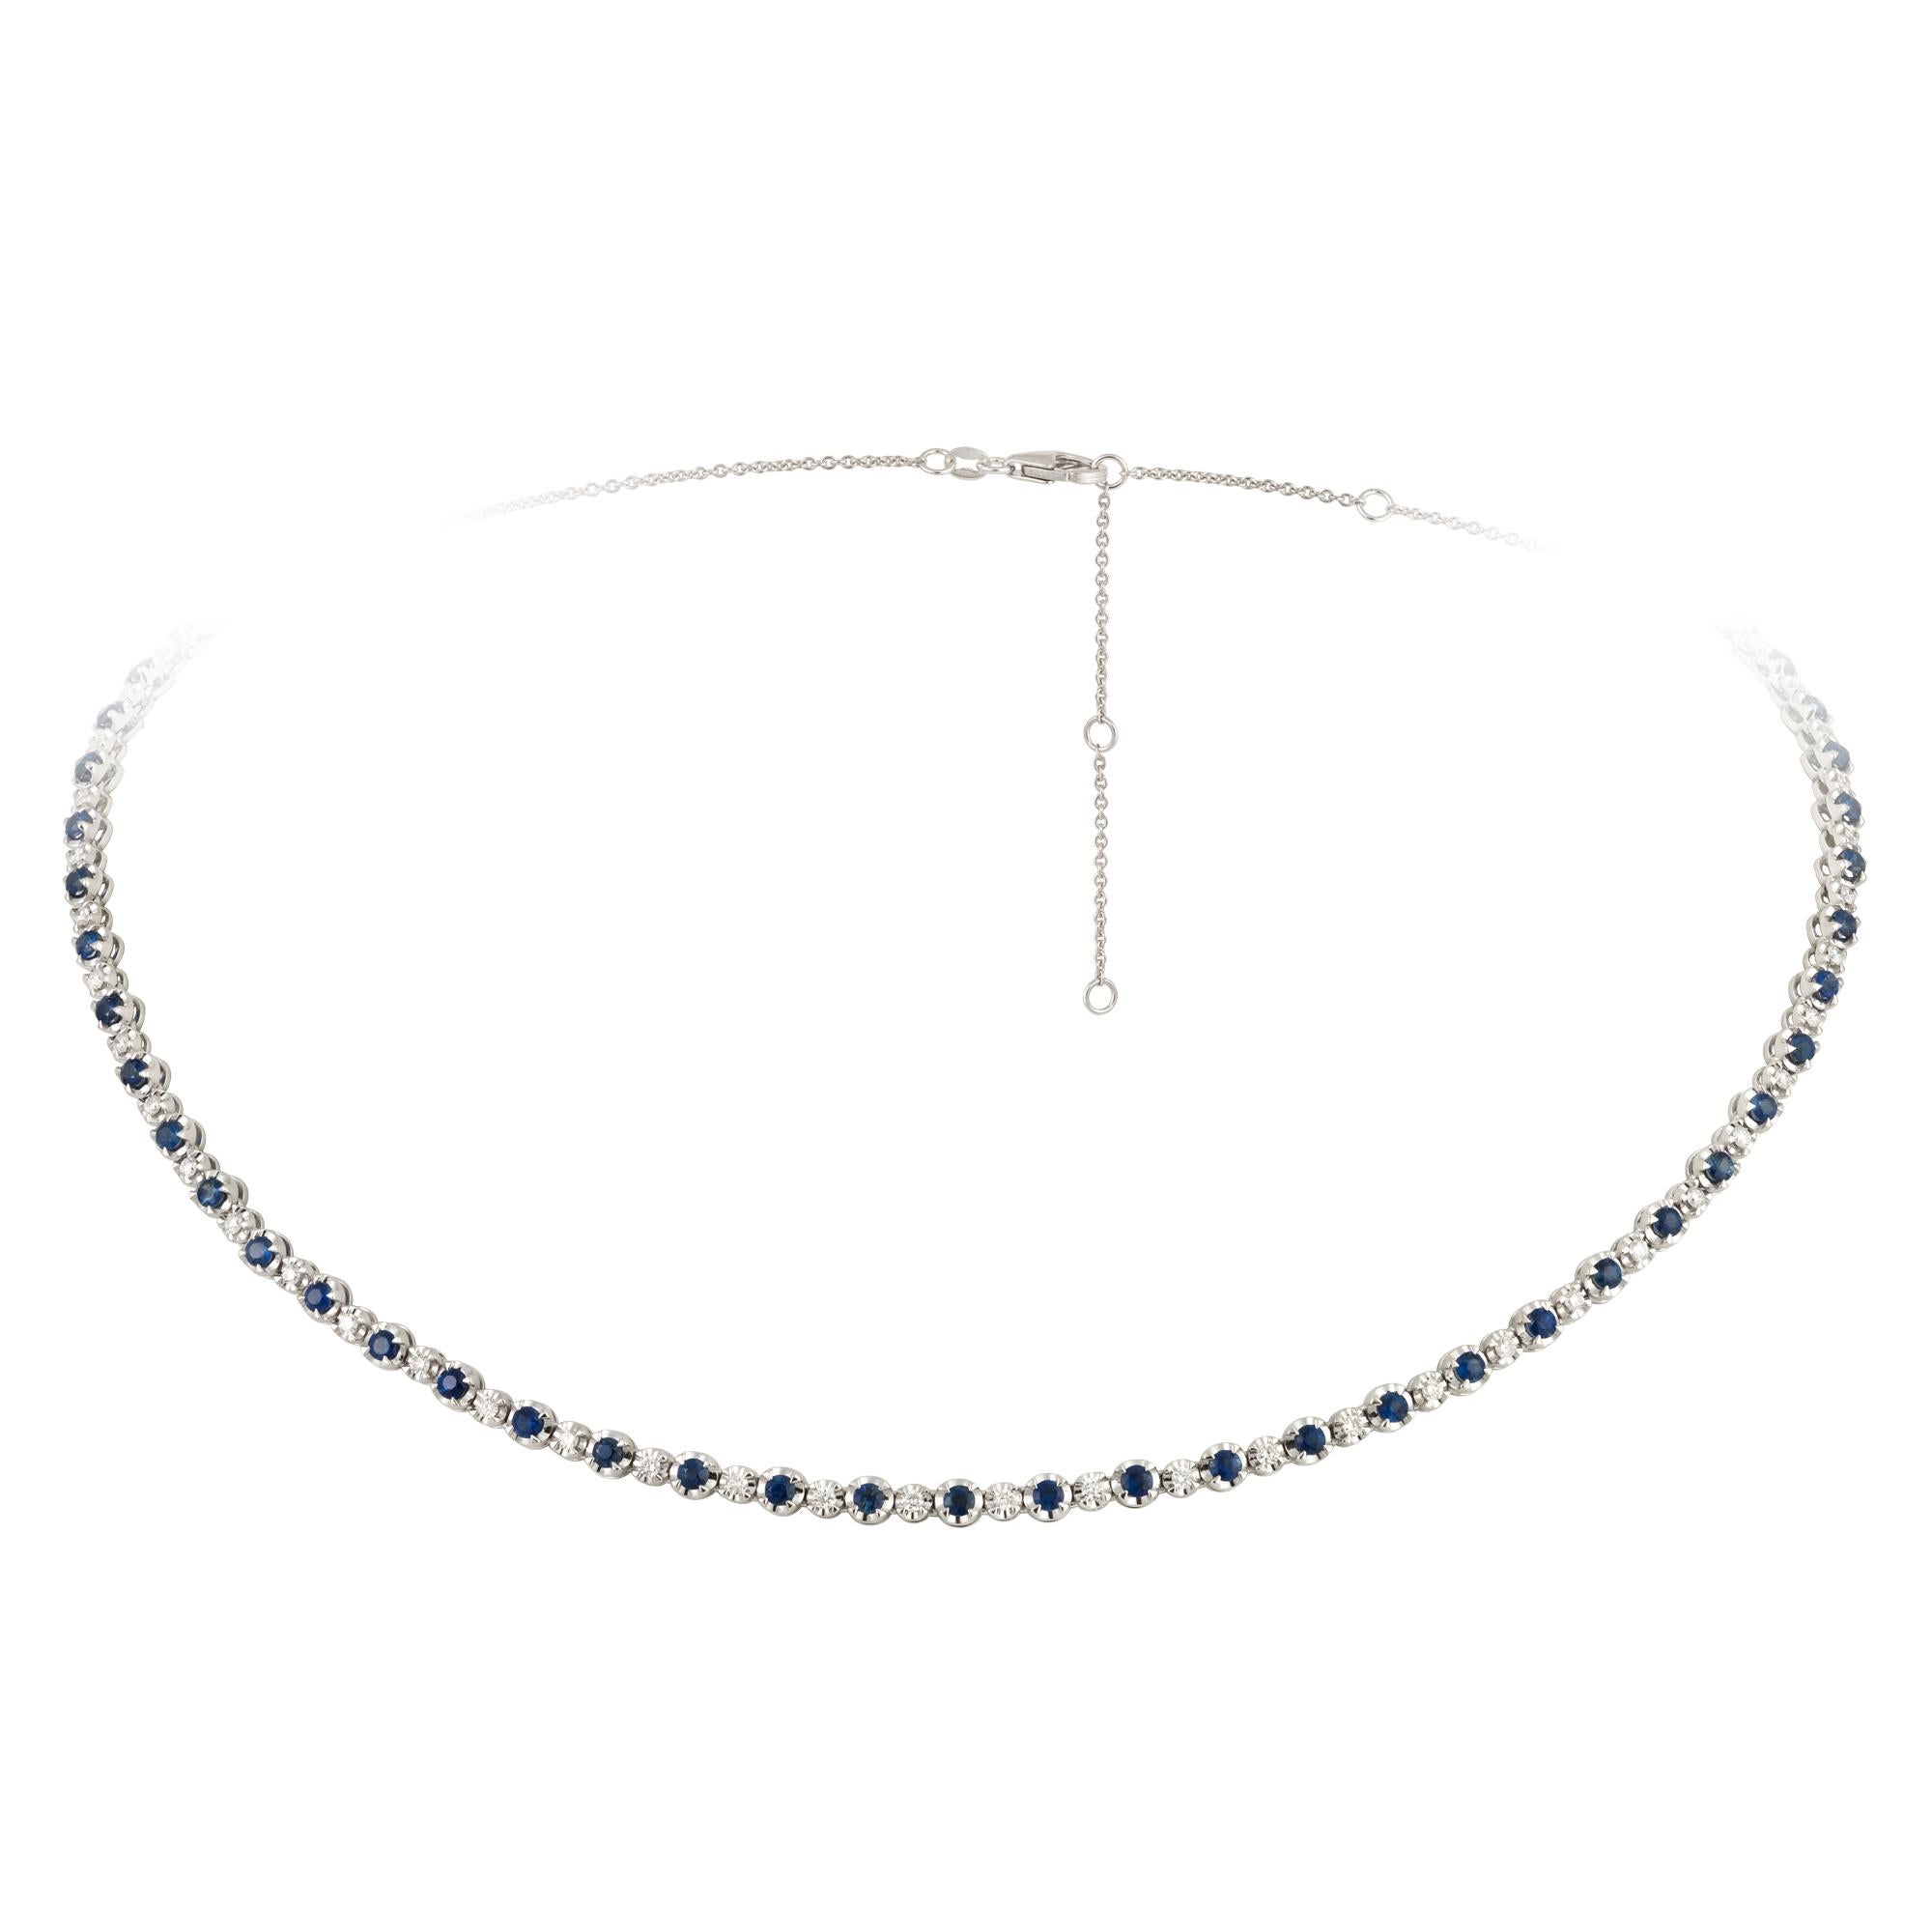 Modern Fashion White Gold 18K Necklace Blue Sapphire Diamond for Her For Sale